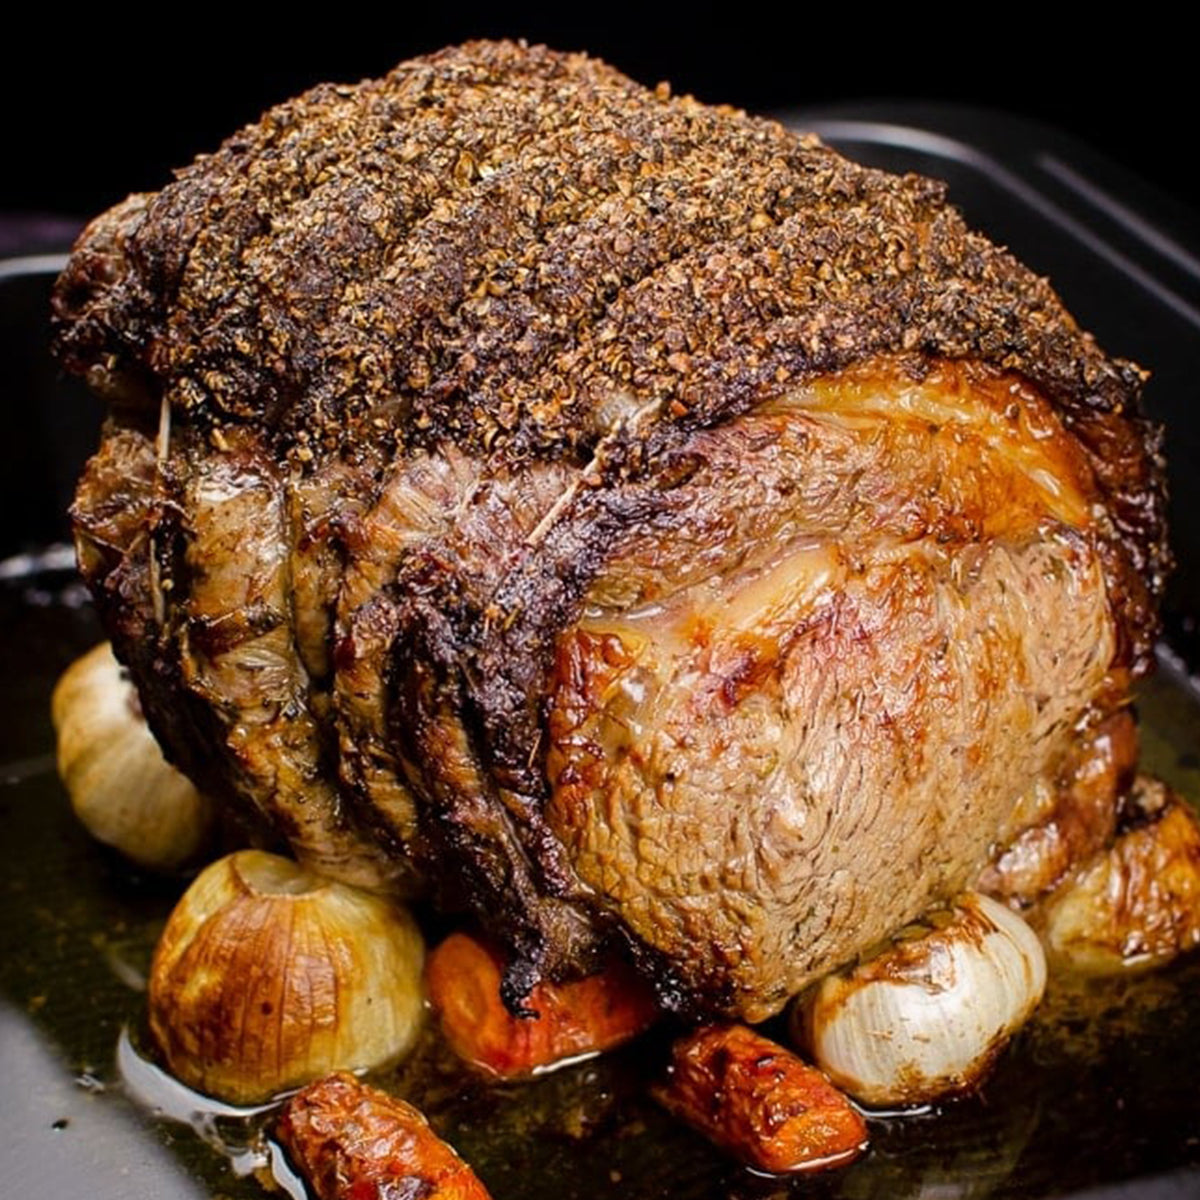 Signature Grass-Fed Beef Rolled Roast